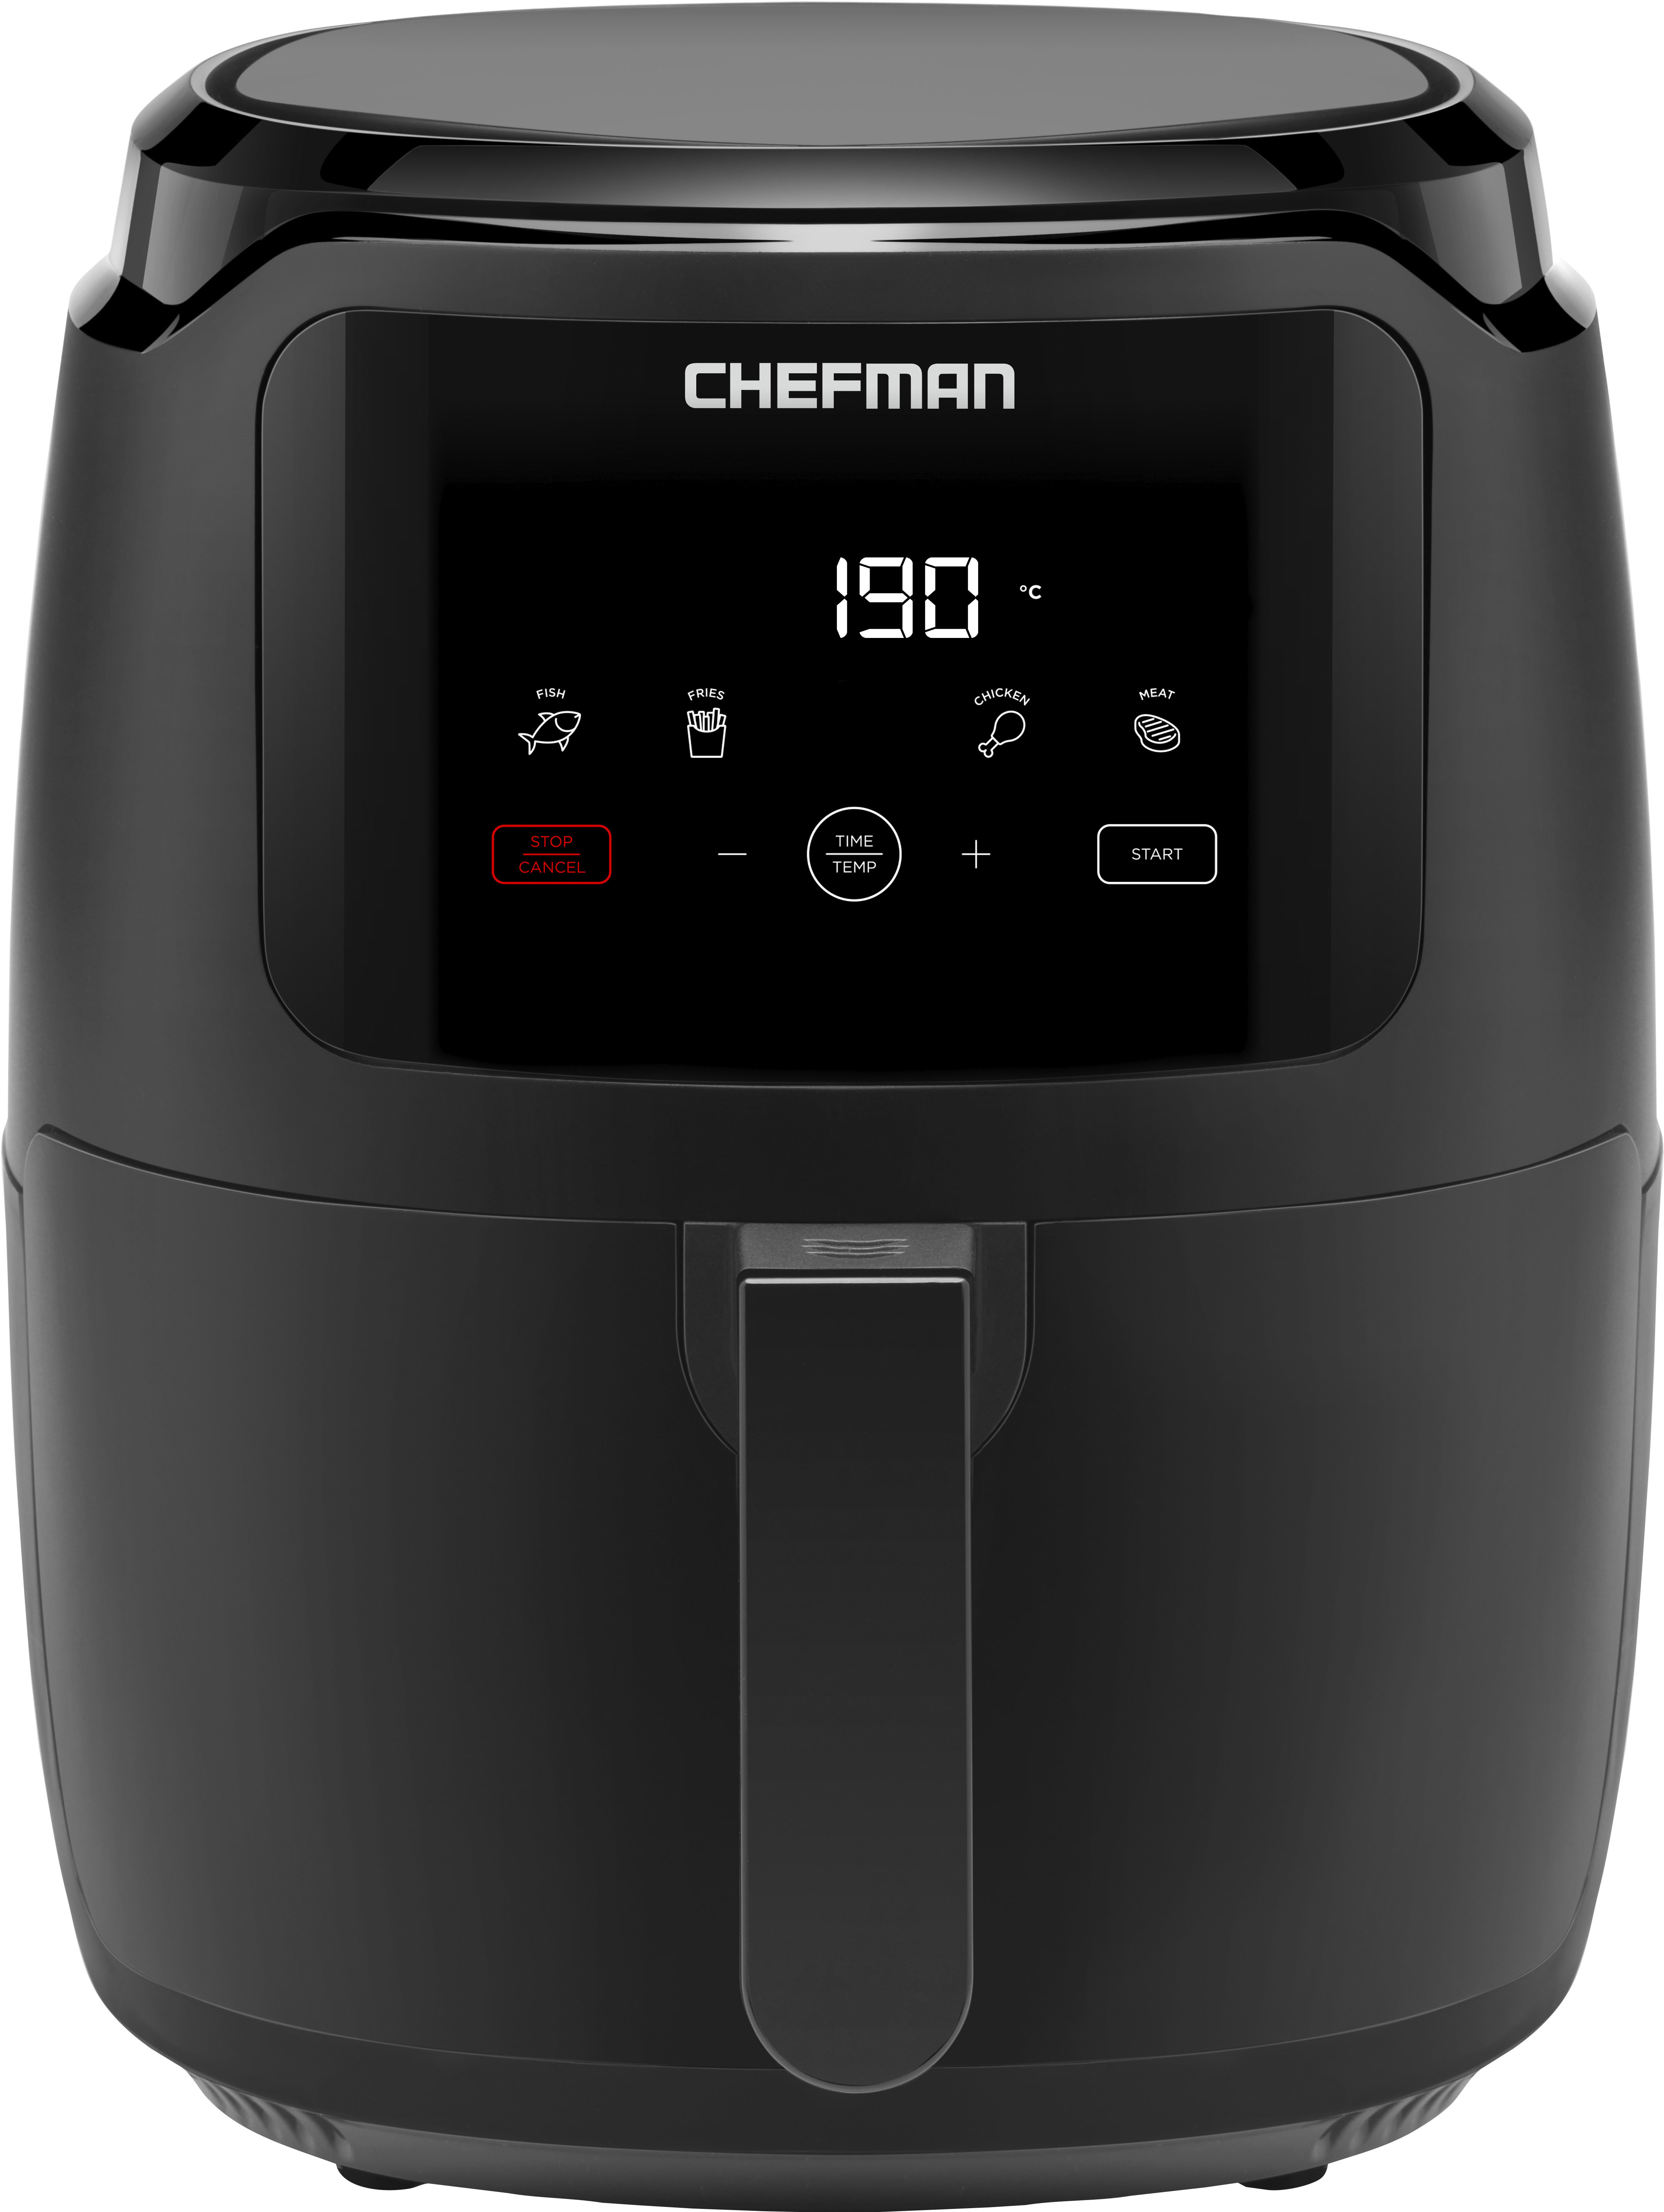 Left View: Chefman Family Size 5 Qt. Digital Air Fryer with 4 Cooking Presets - Black